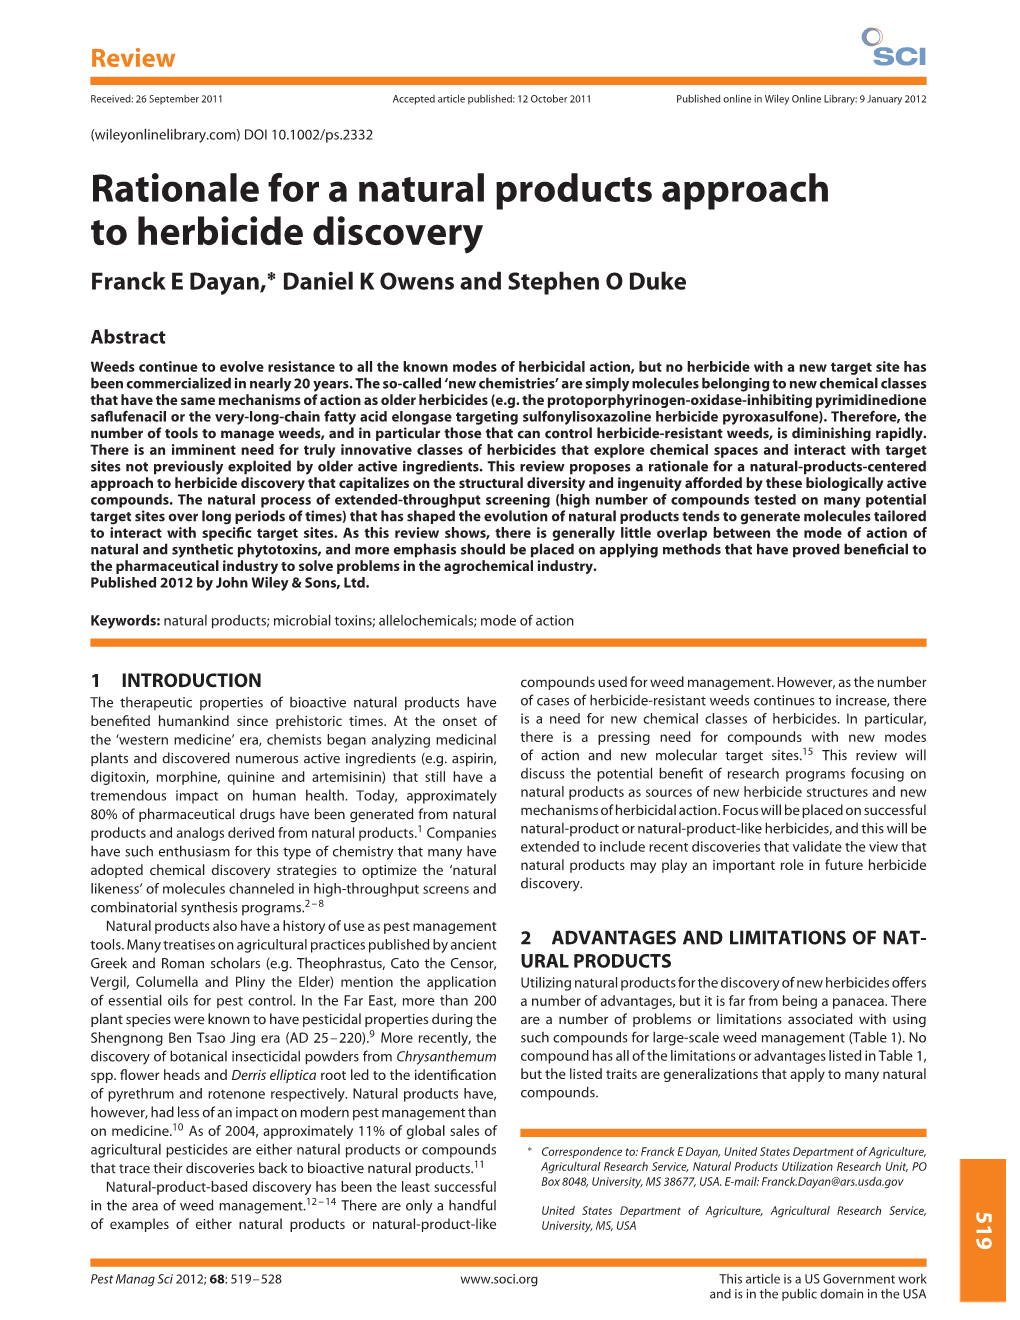 Rationale for a Natural Products Approach to Herbicide Discovery